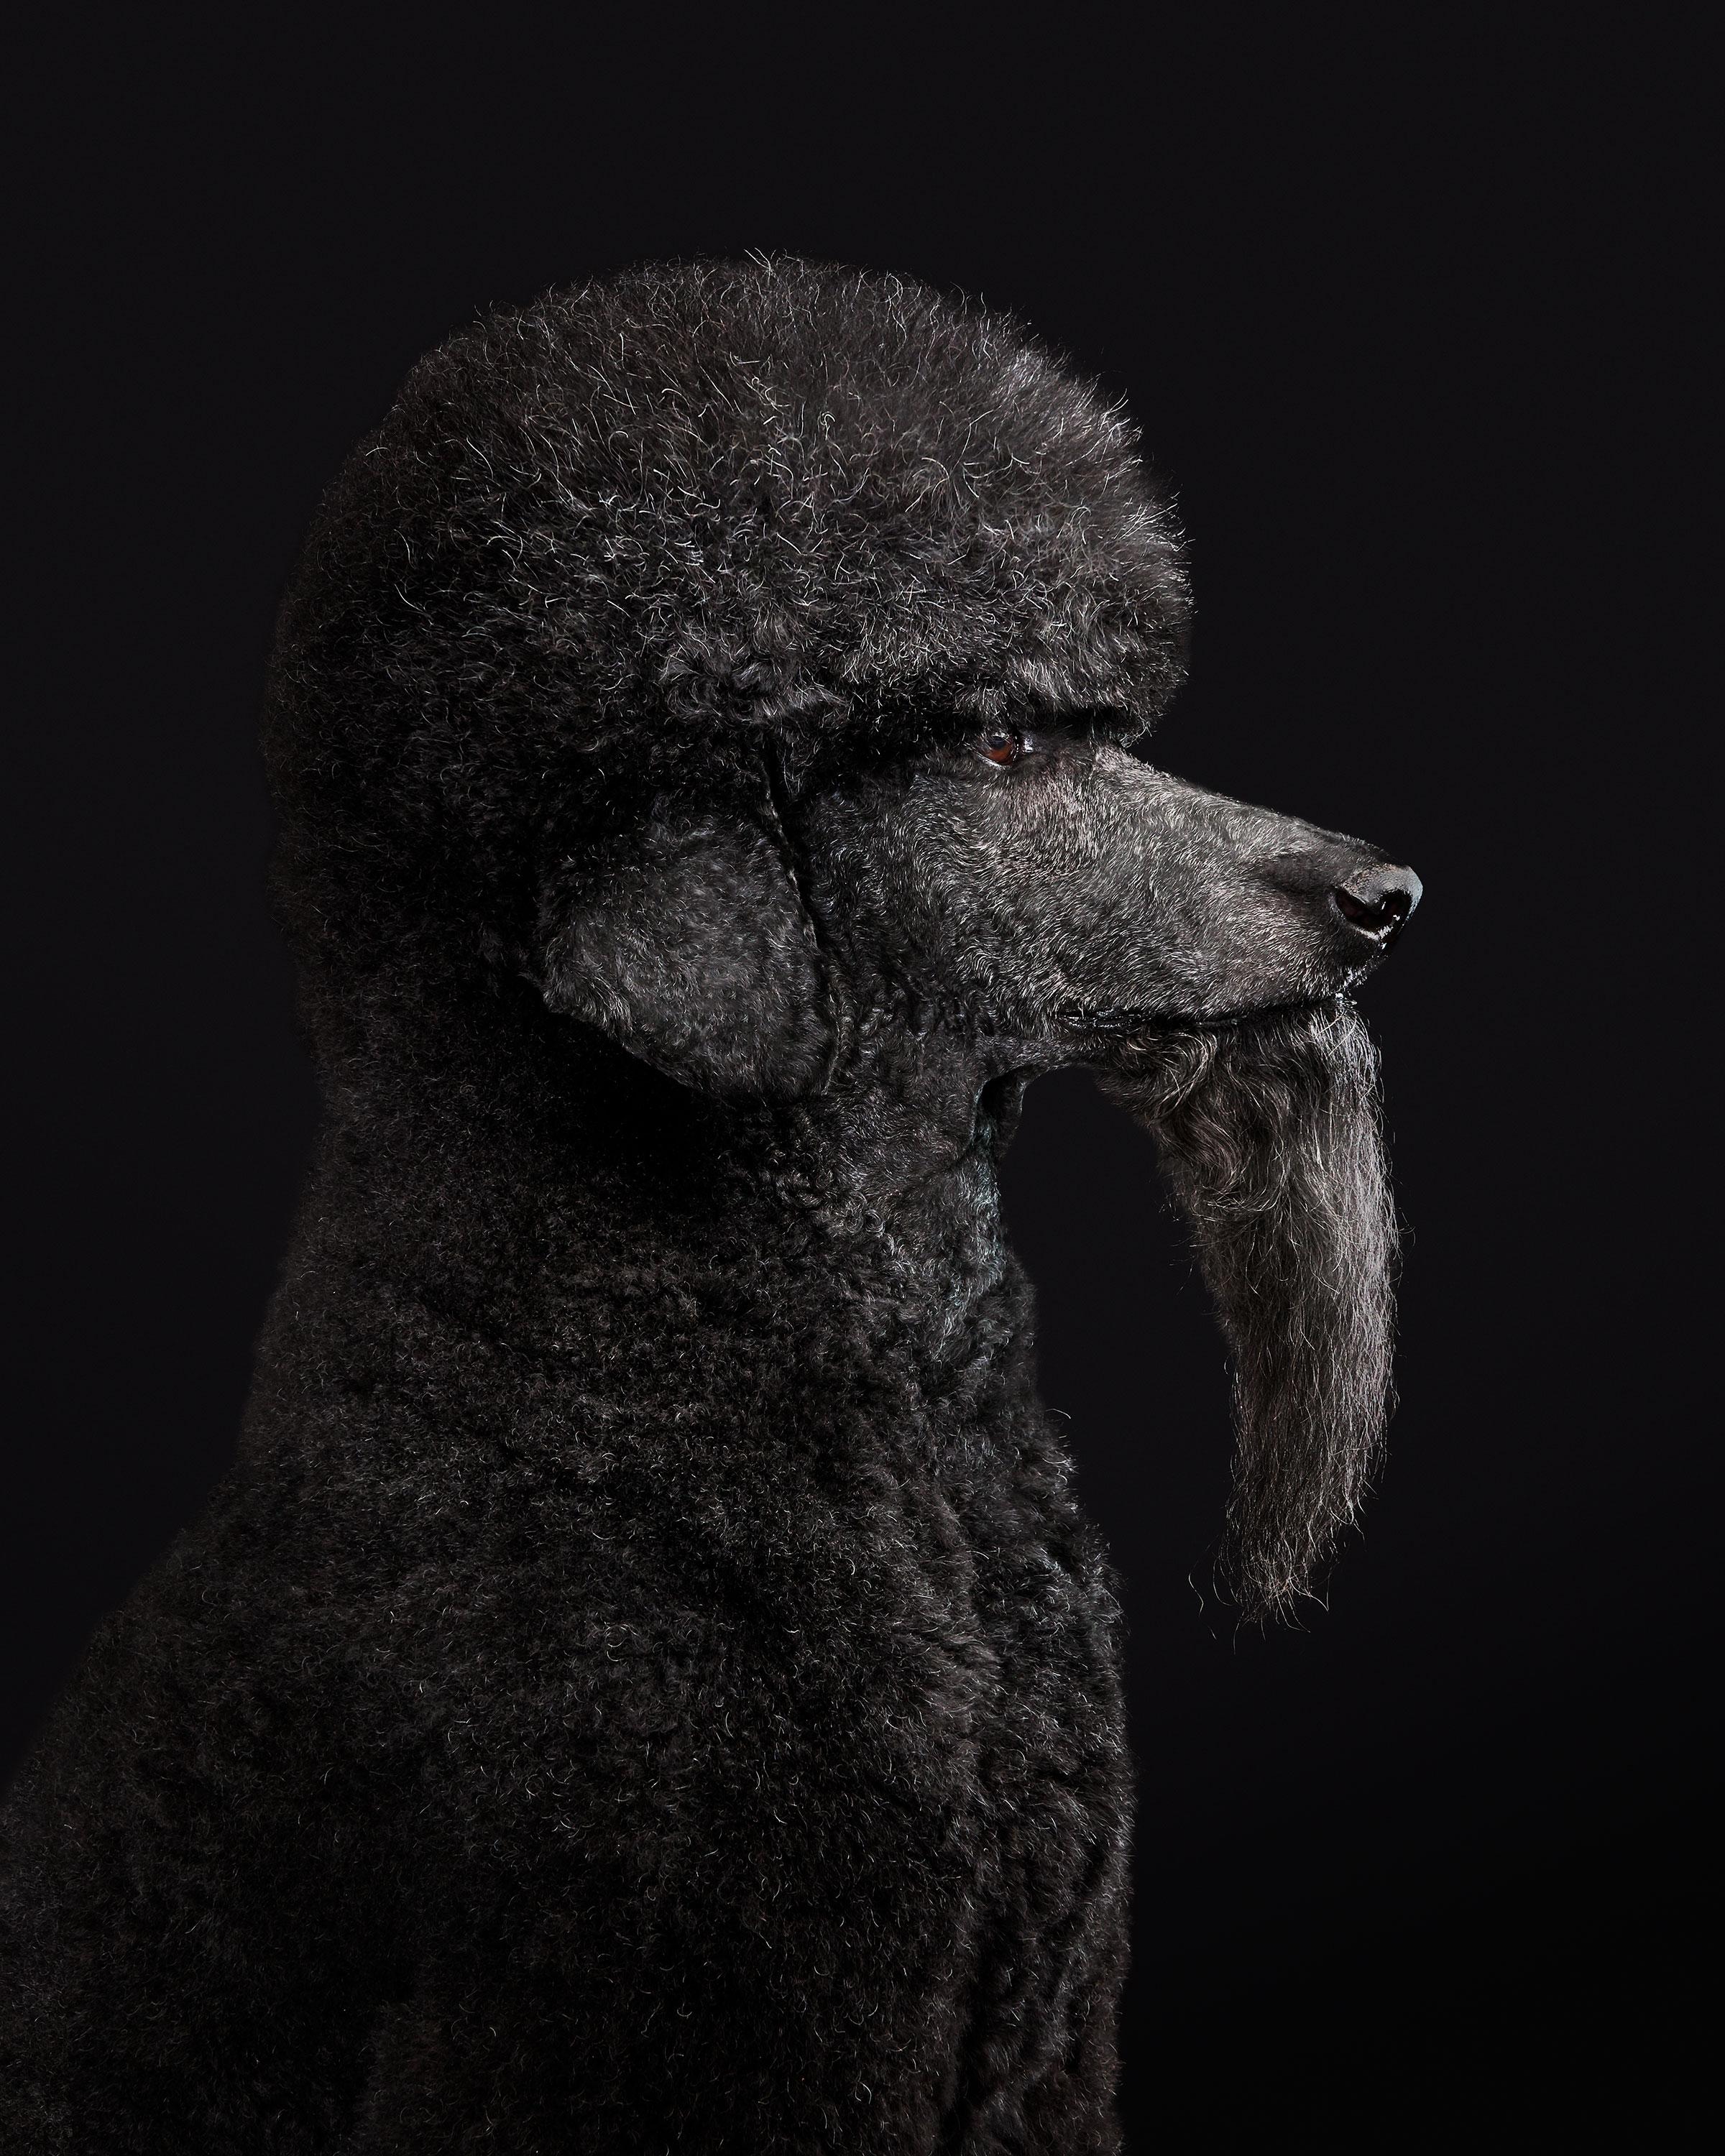 Available sizes:
37.5" x 30", Edition of 15
50" x 40", Edition of 10
60" x 48", Edition of 5

Narrative:
There is nothing standard about this poodle. Ceelo is one of the most interestingly decorated dogs I have ever had the pleasure of meeting. His